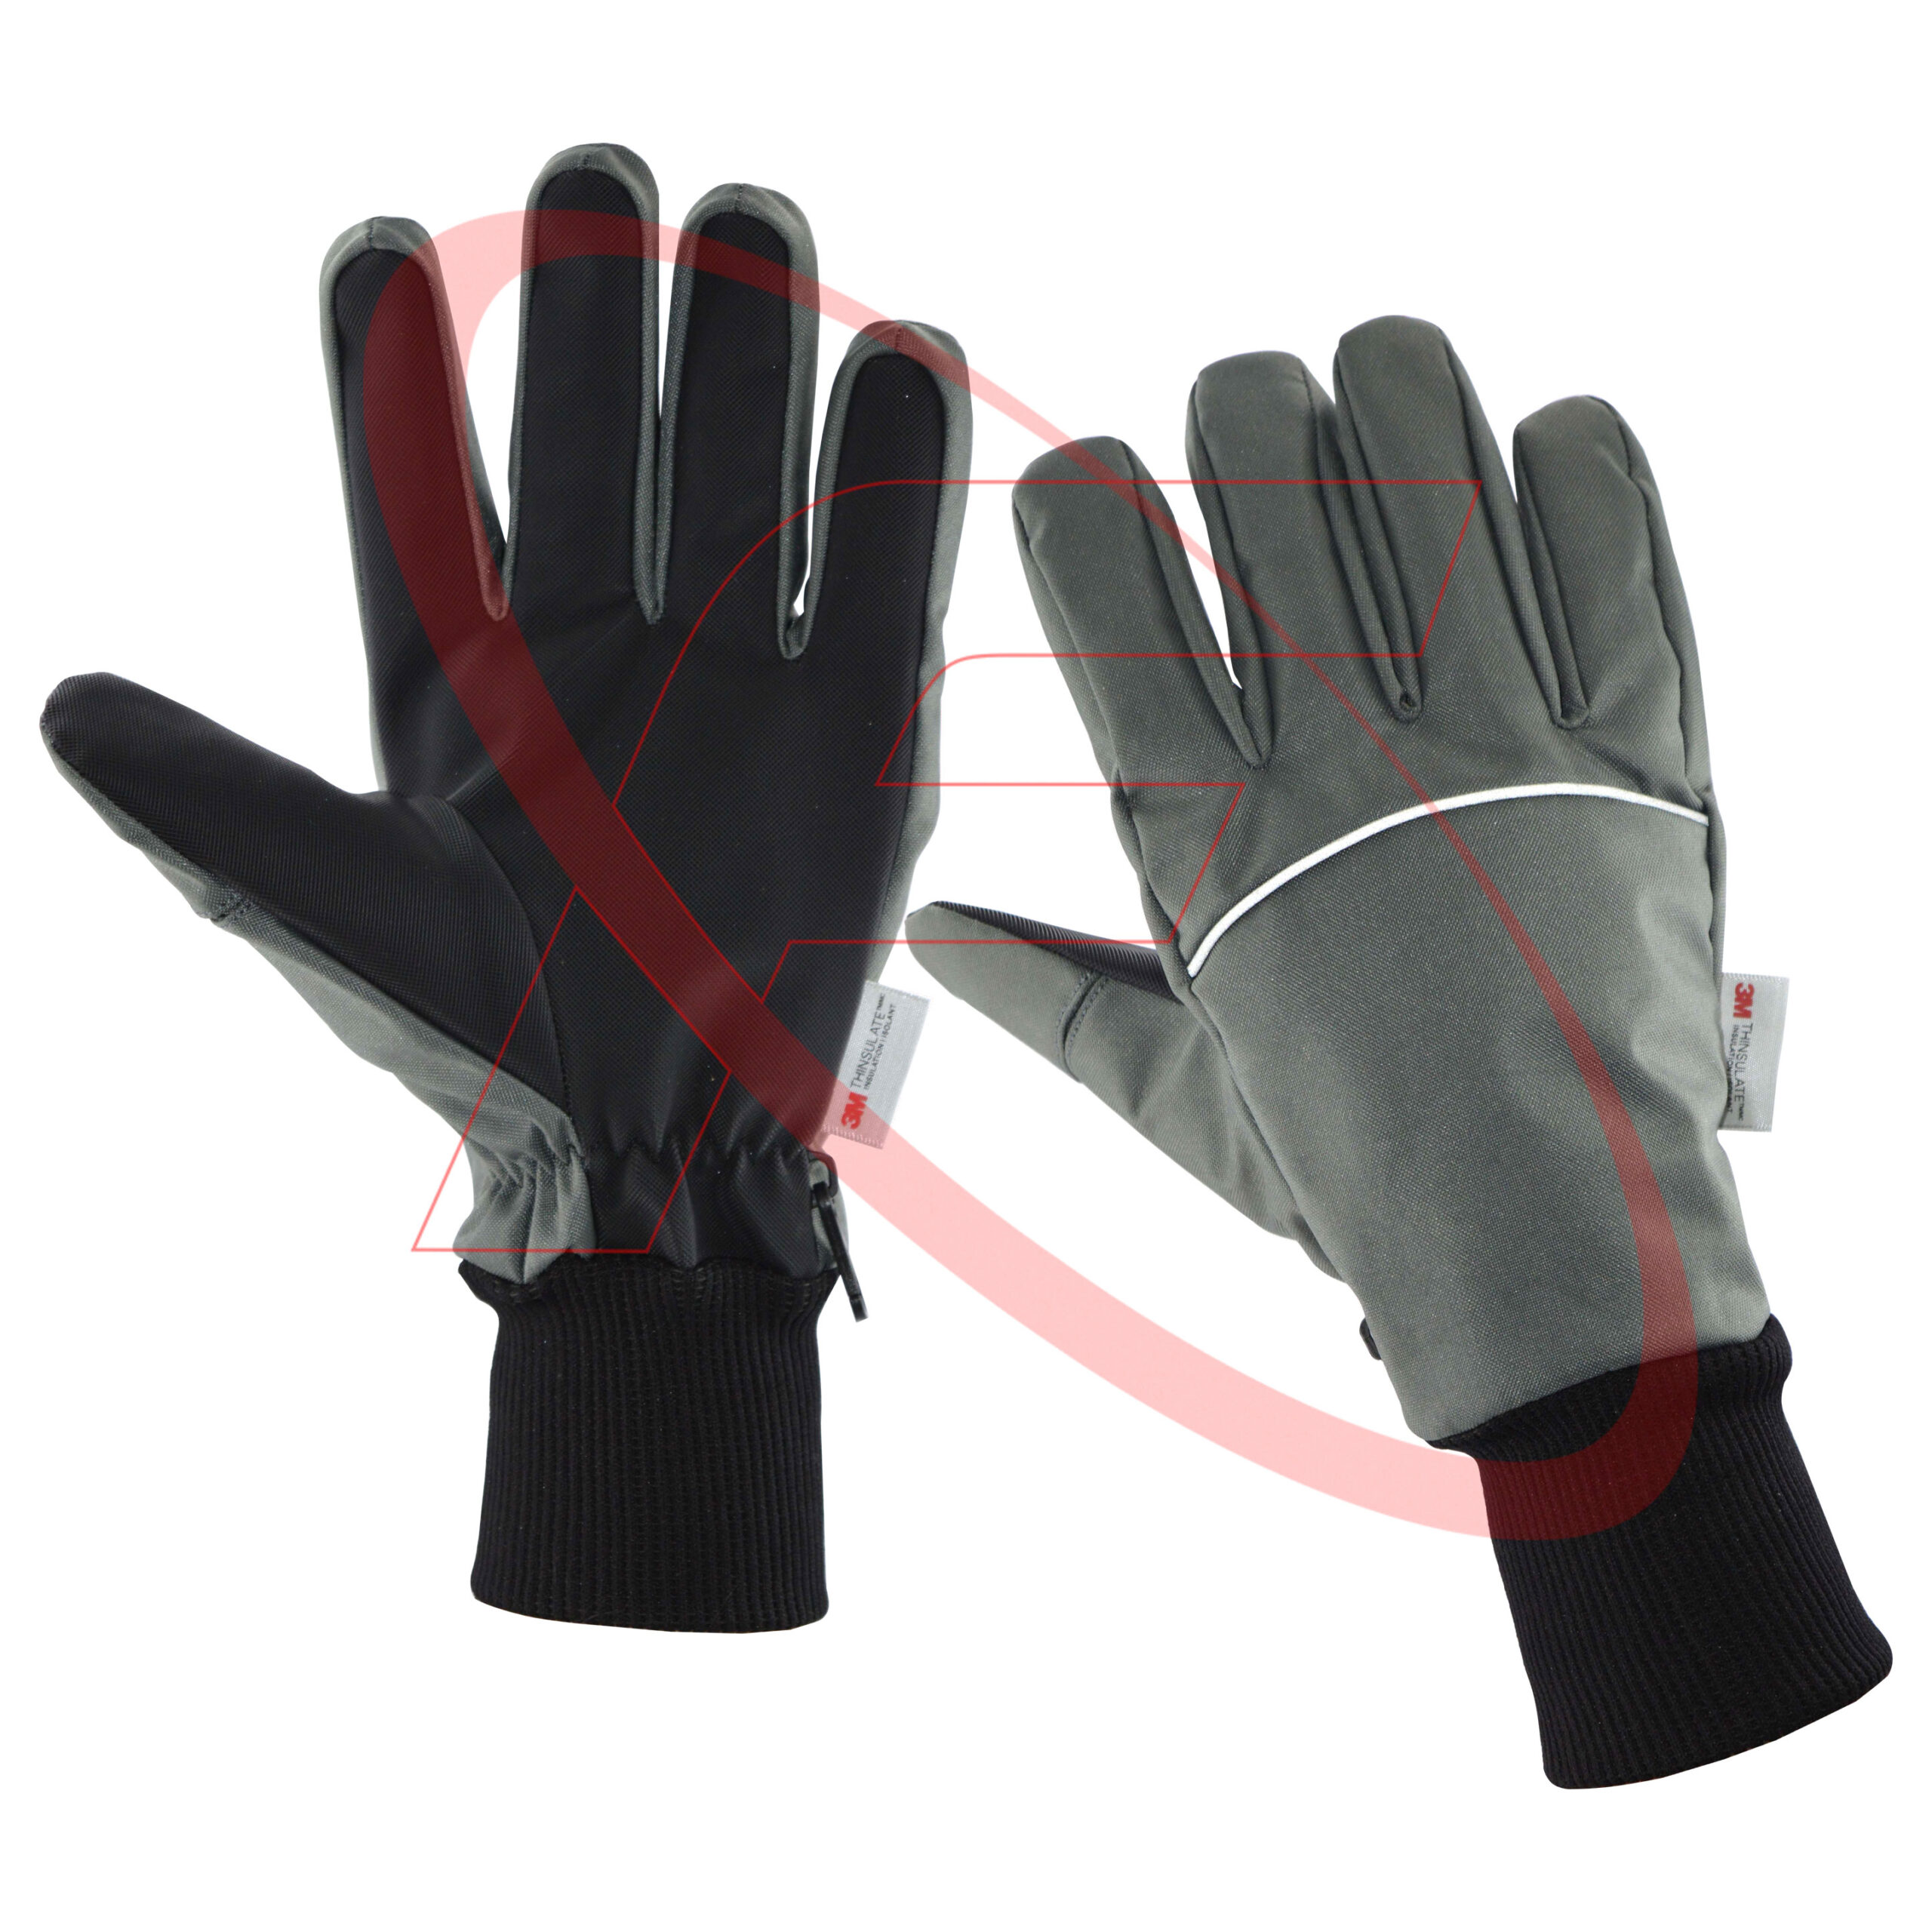 Gray Winter Mechanic Gloves in Synthetic Leather Best Choice Safety Gloves Winter Gloves for Weather Resistance